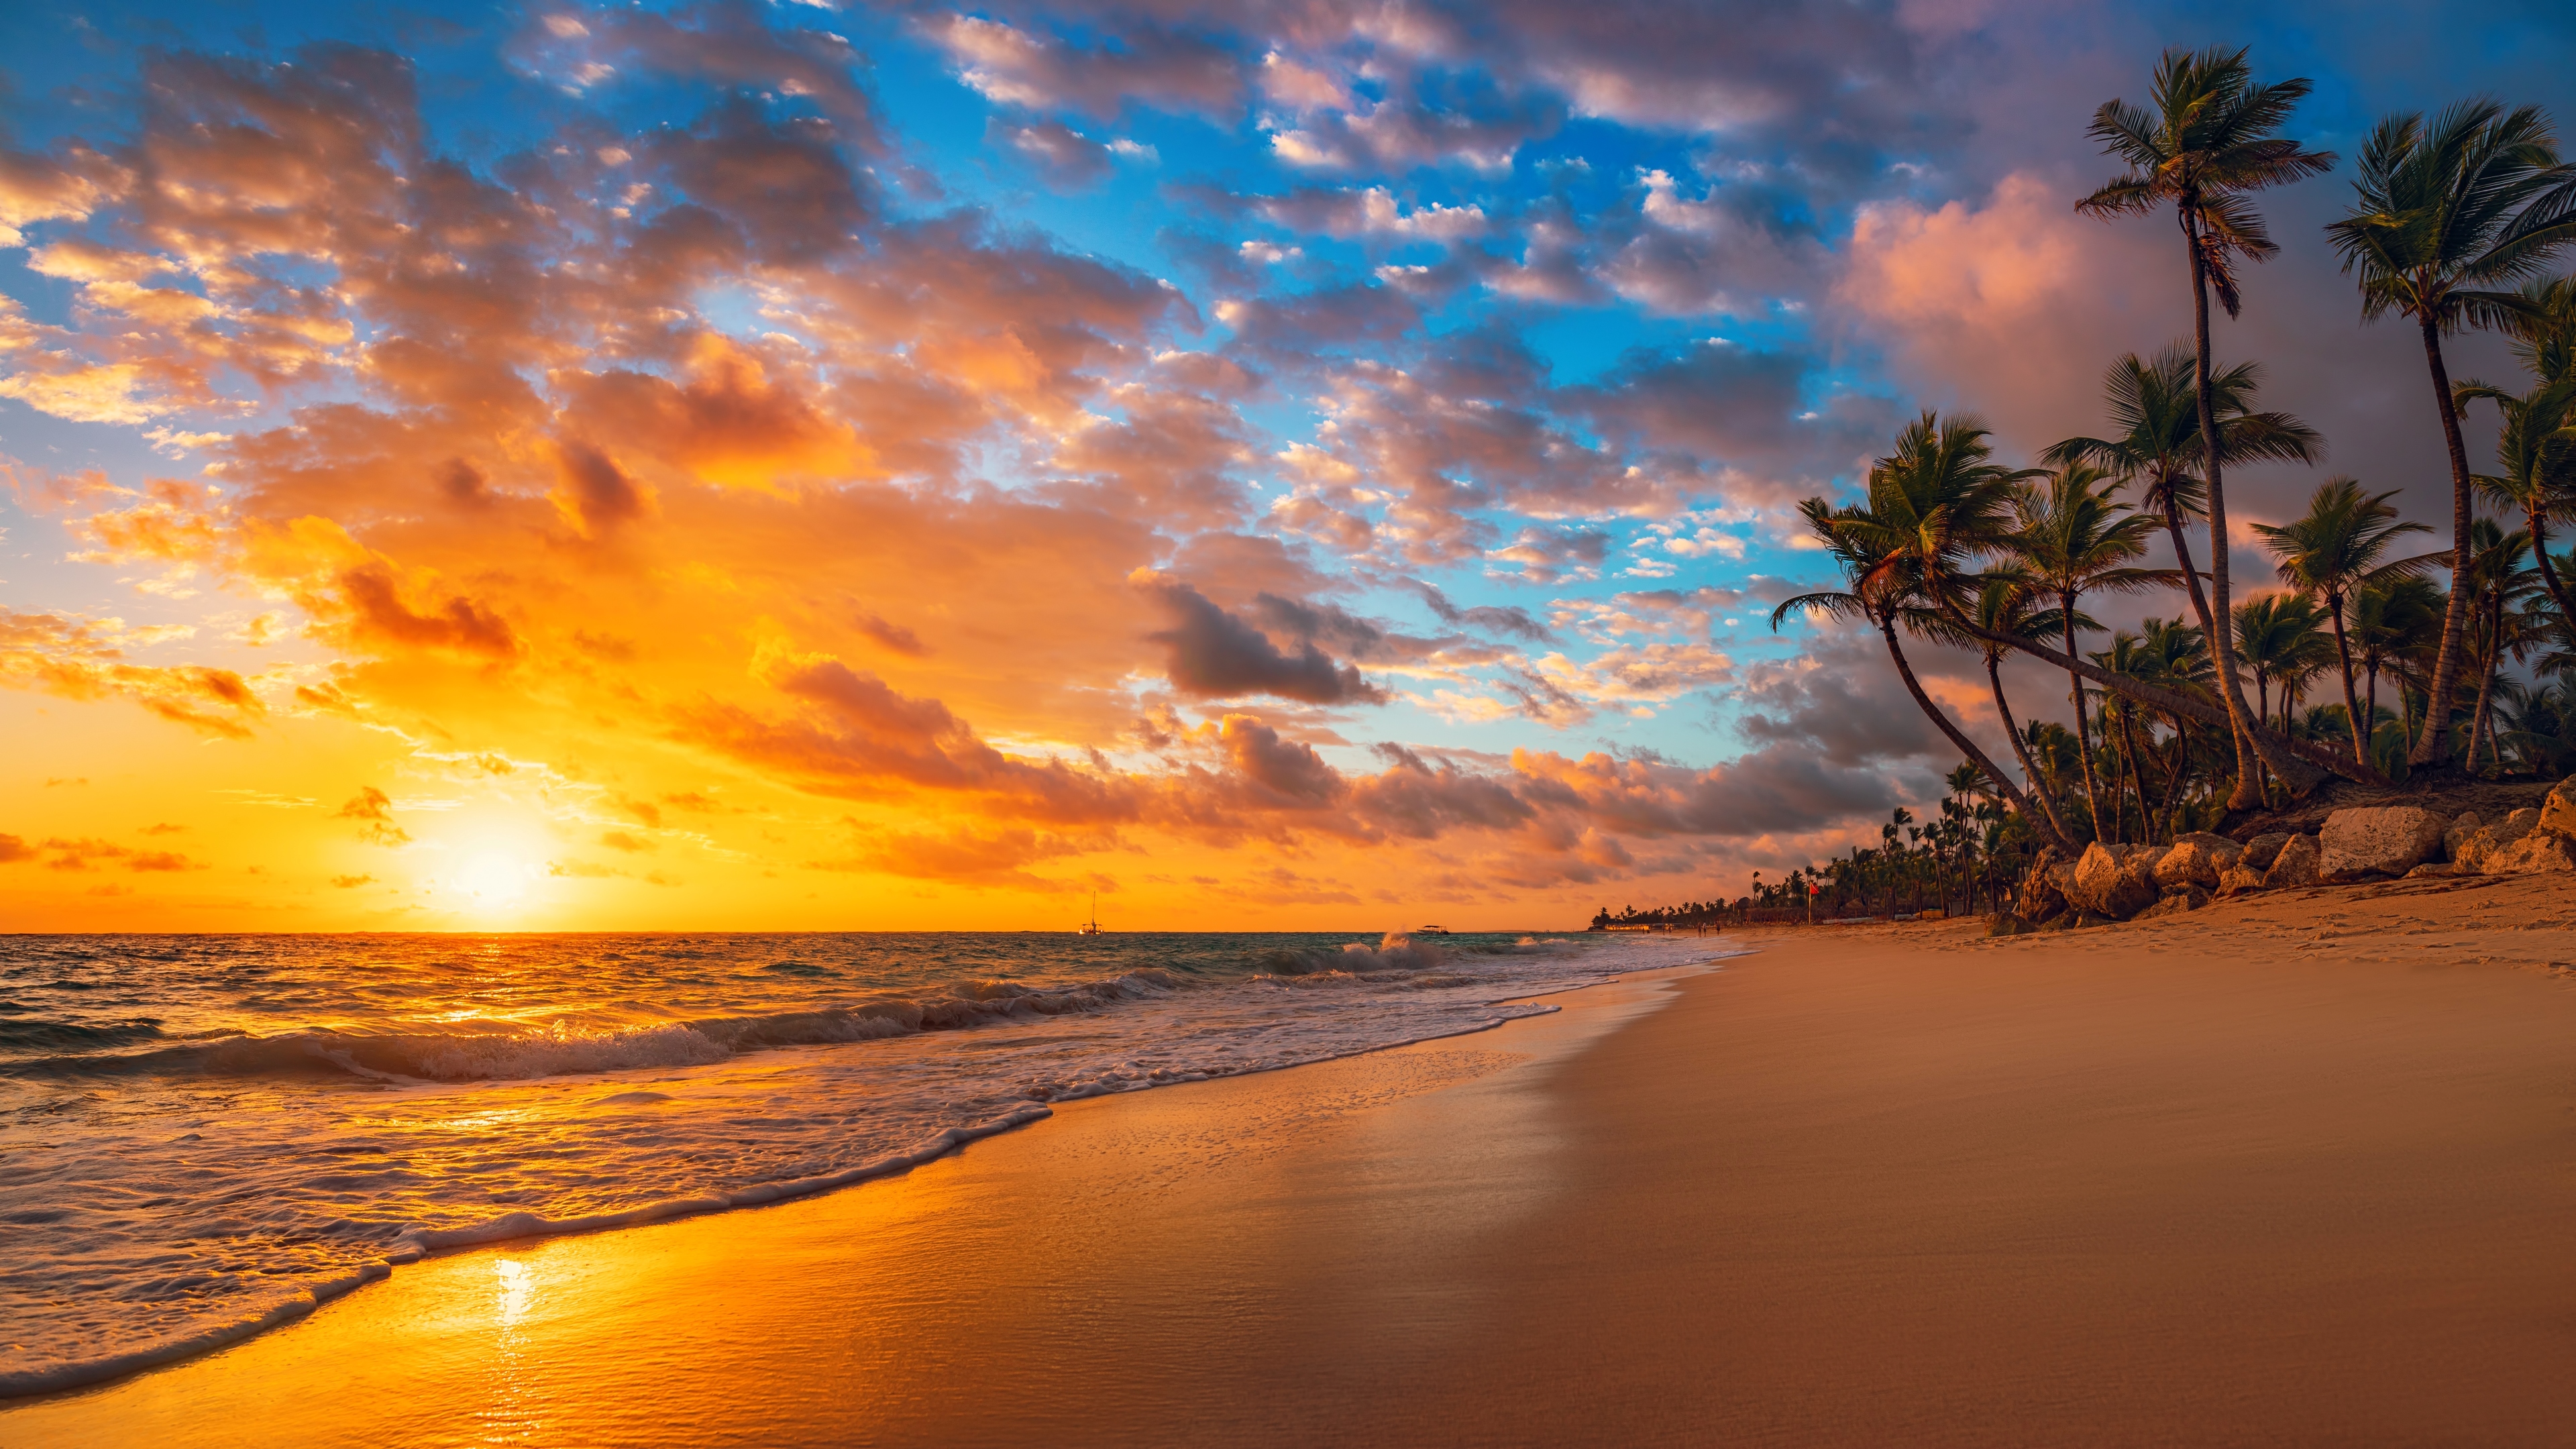 Beach Sea Nature Sunset Waves Sky Clouds Palm Trees Tropic Island Landscape Water 3840x2160